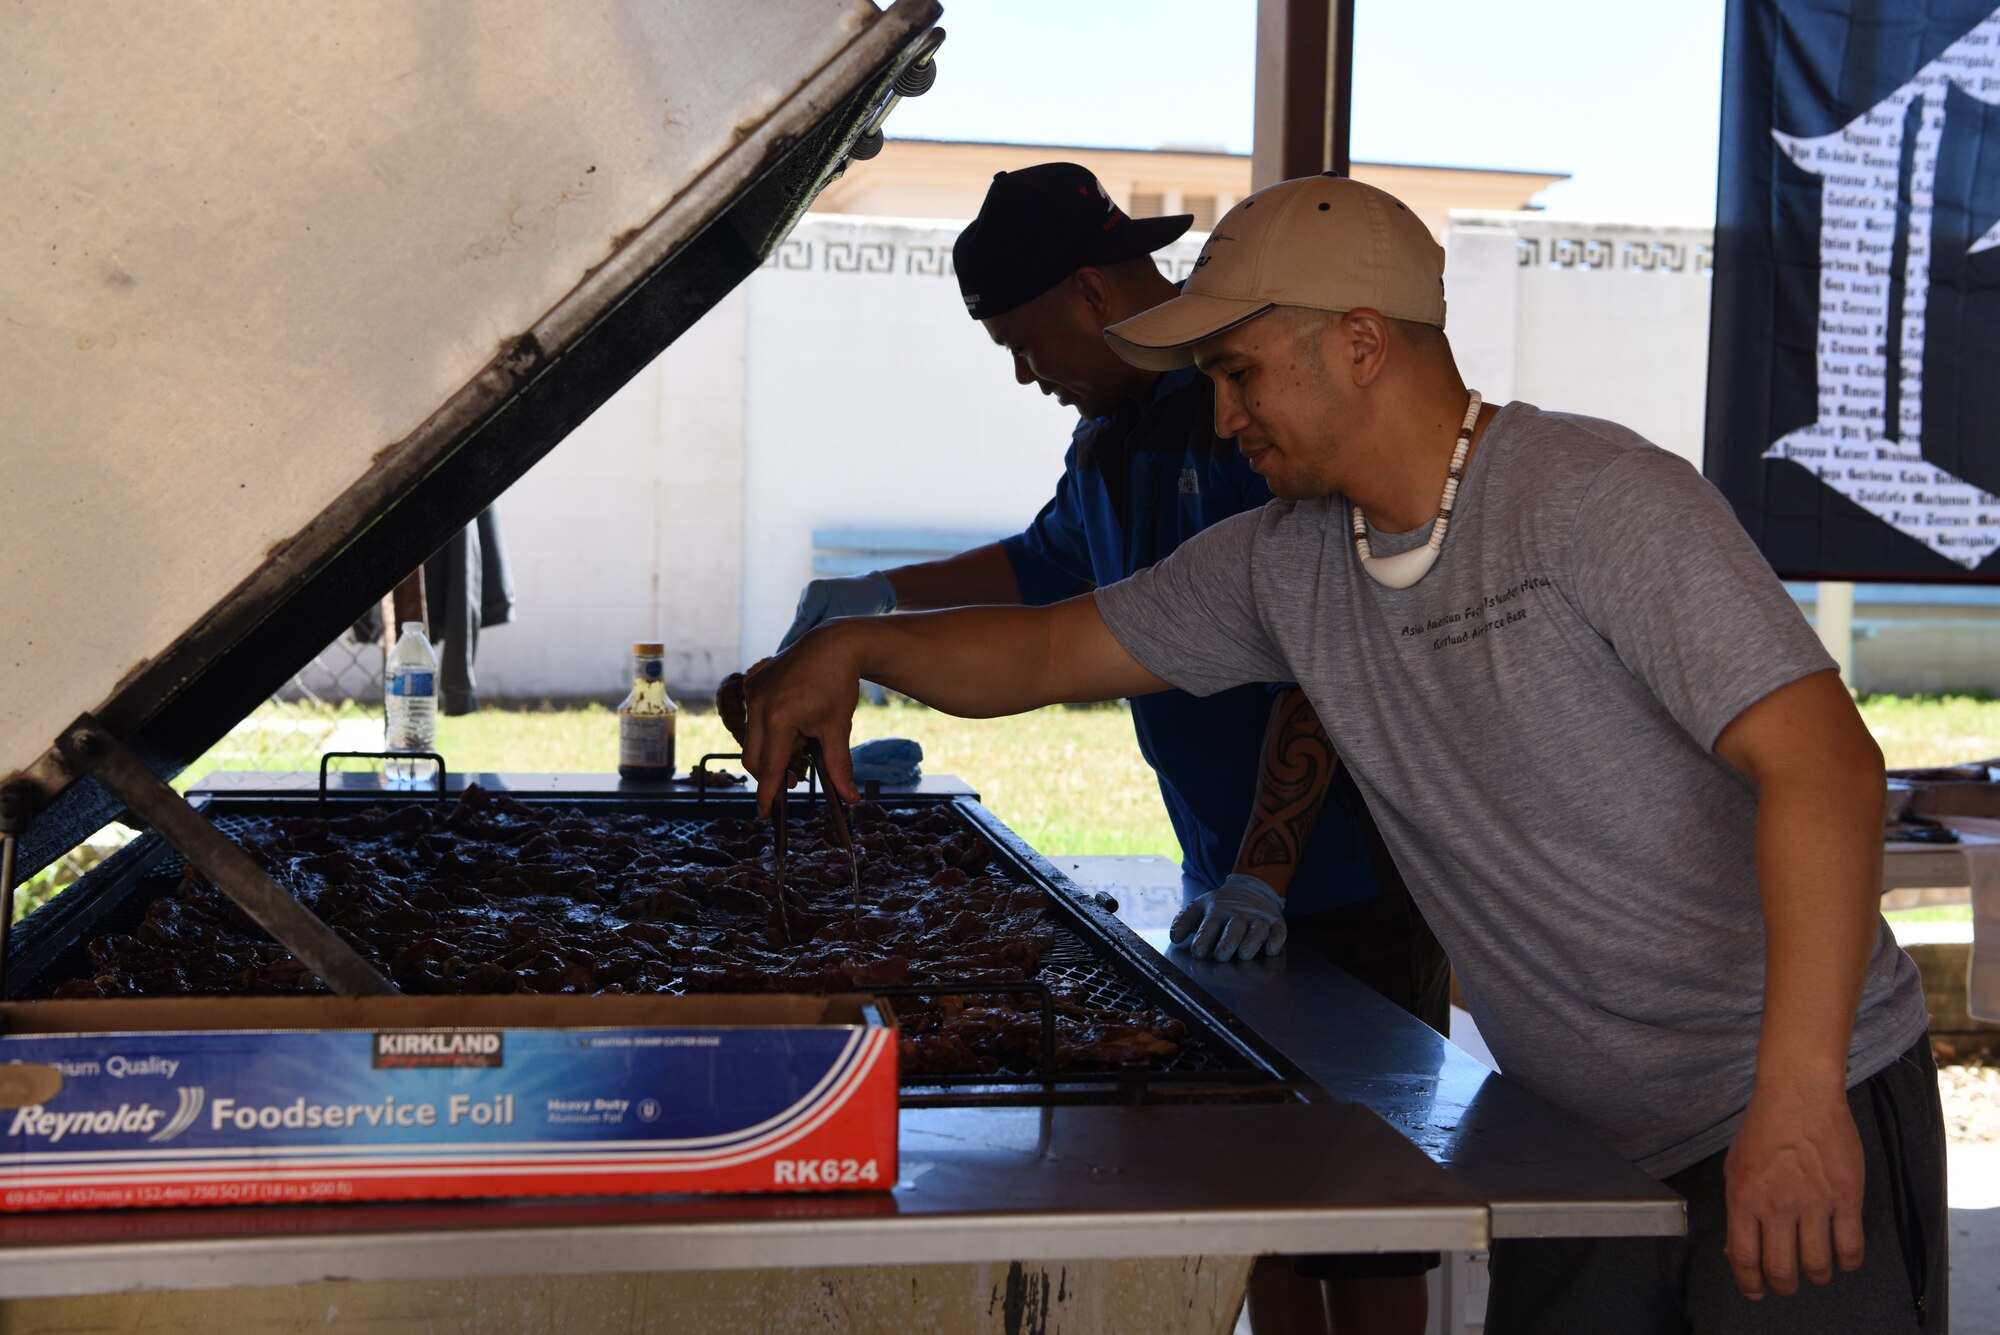 U.S. Air Force Tech. Sgt. Joel Rivera, right, 58th Maintenance Group, and Master Sgt. Jose Estampador, Air Force Nuclear Weapons Center, prepare food for the Asian-American Pacific Islander Heritage Cultural Show and Luncheon at Kirtland Air Force Base, N.M., May 22, 2019. Attendees were provided with a lunch that included grilled beef, lumpia and kalua pork. (U.S. Air Force photo by Senior Airman Eli Chevalier)